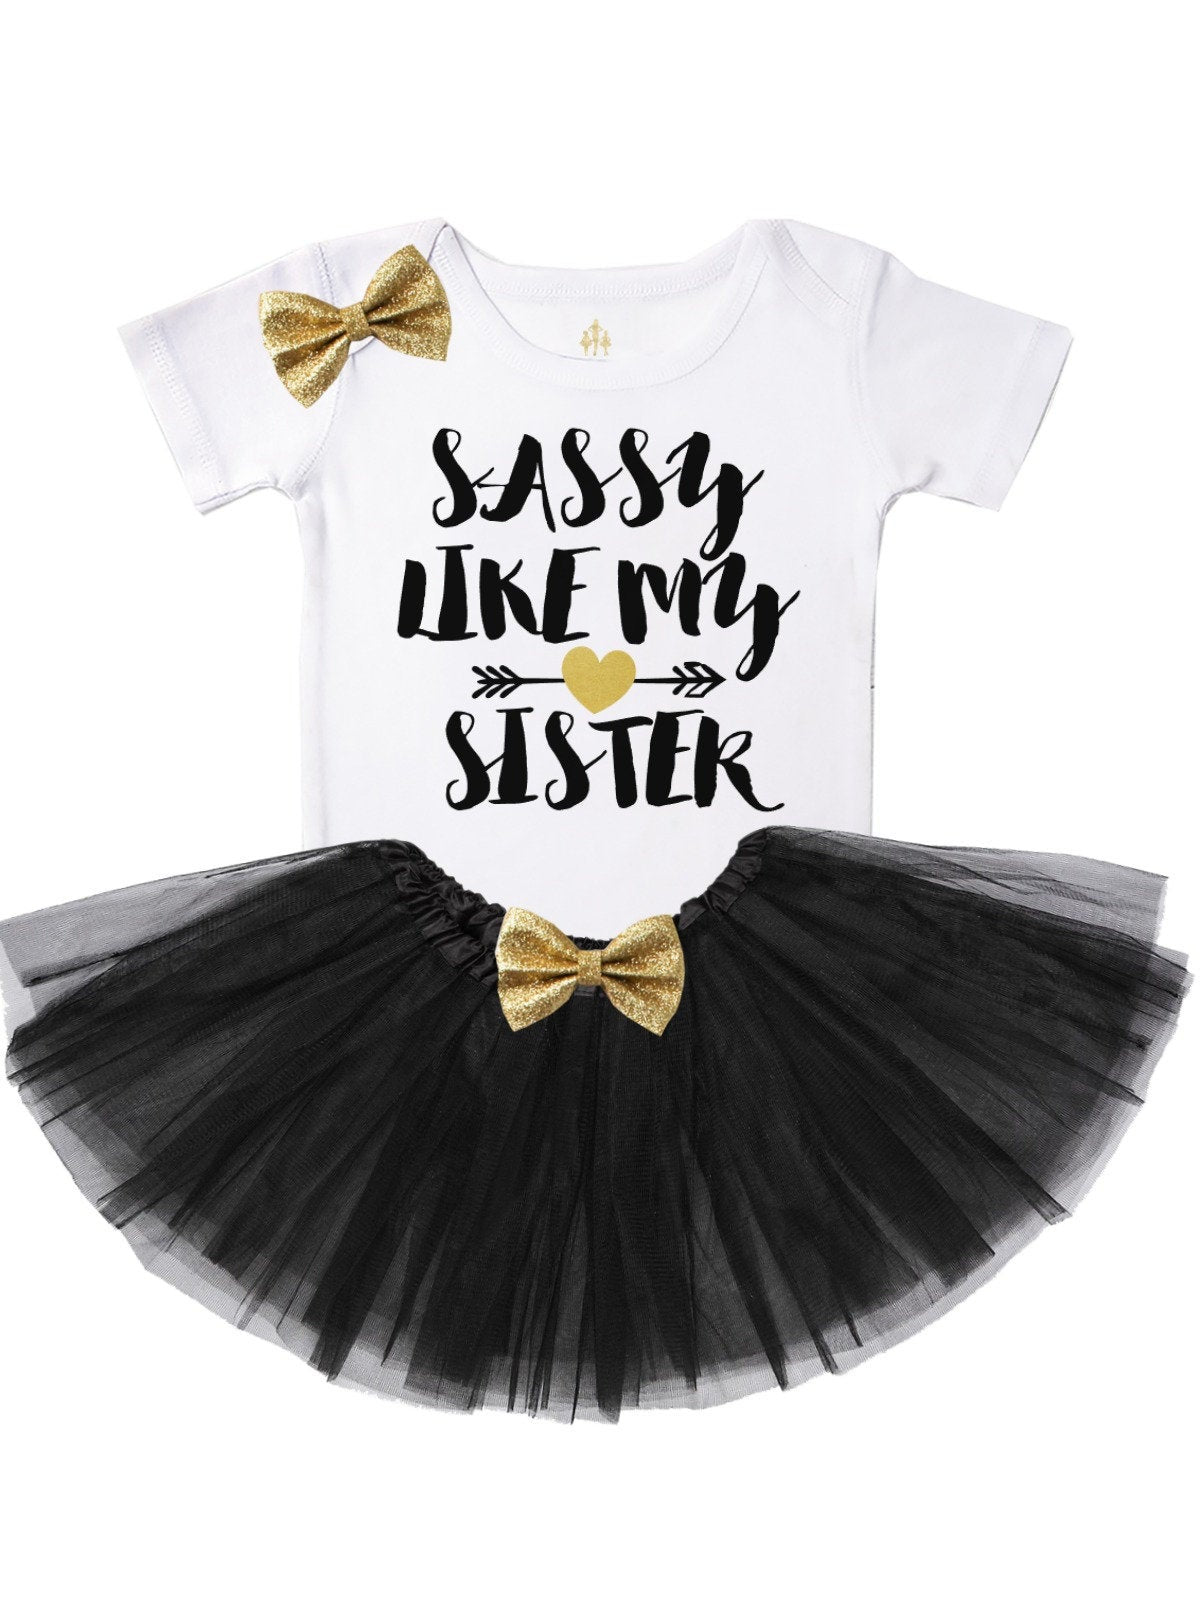 sassy like my sister tutu outfit